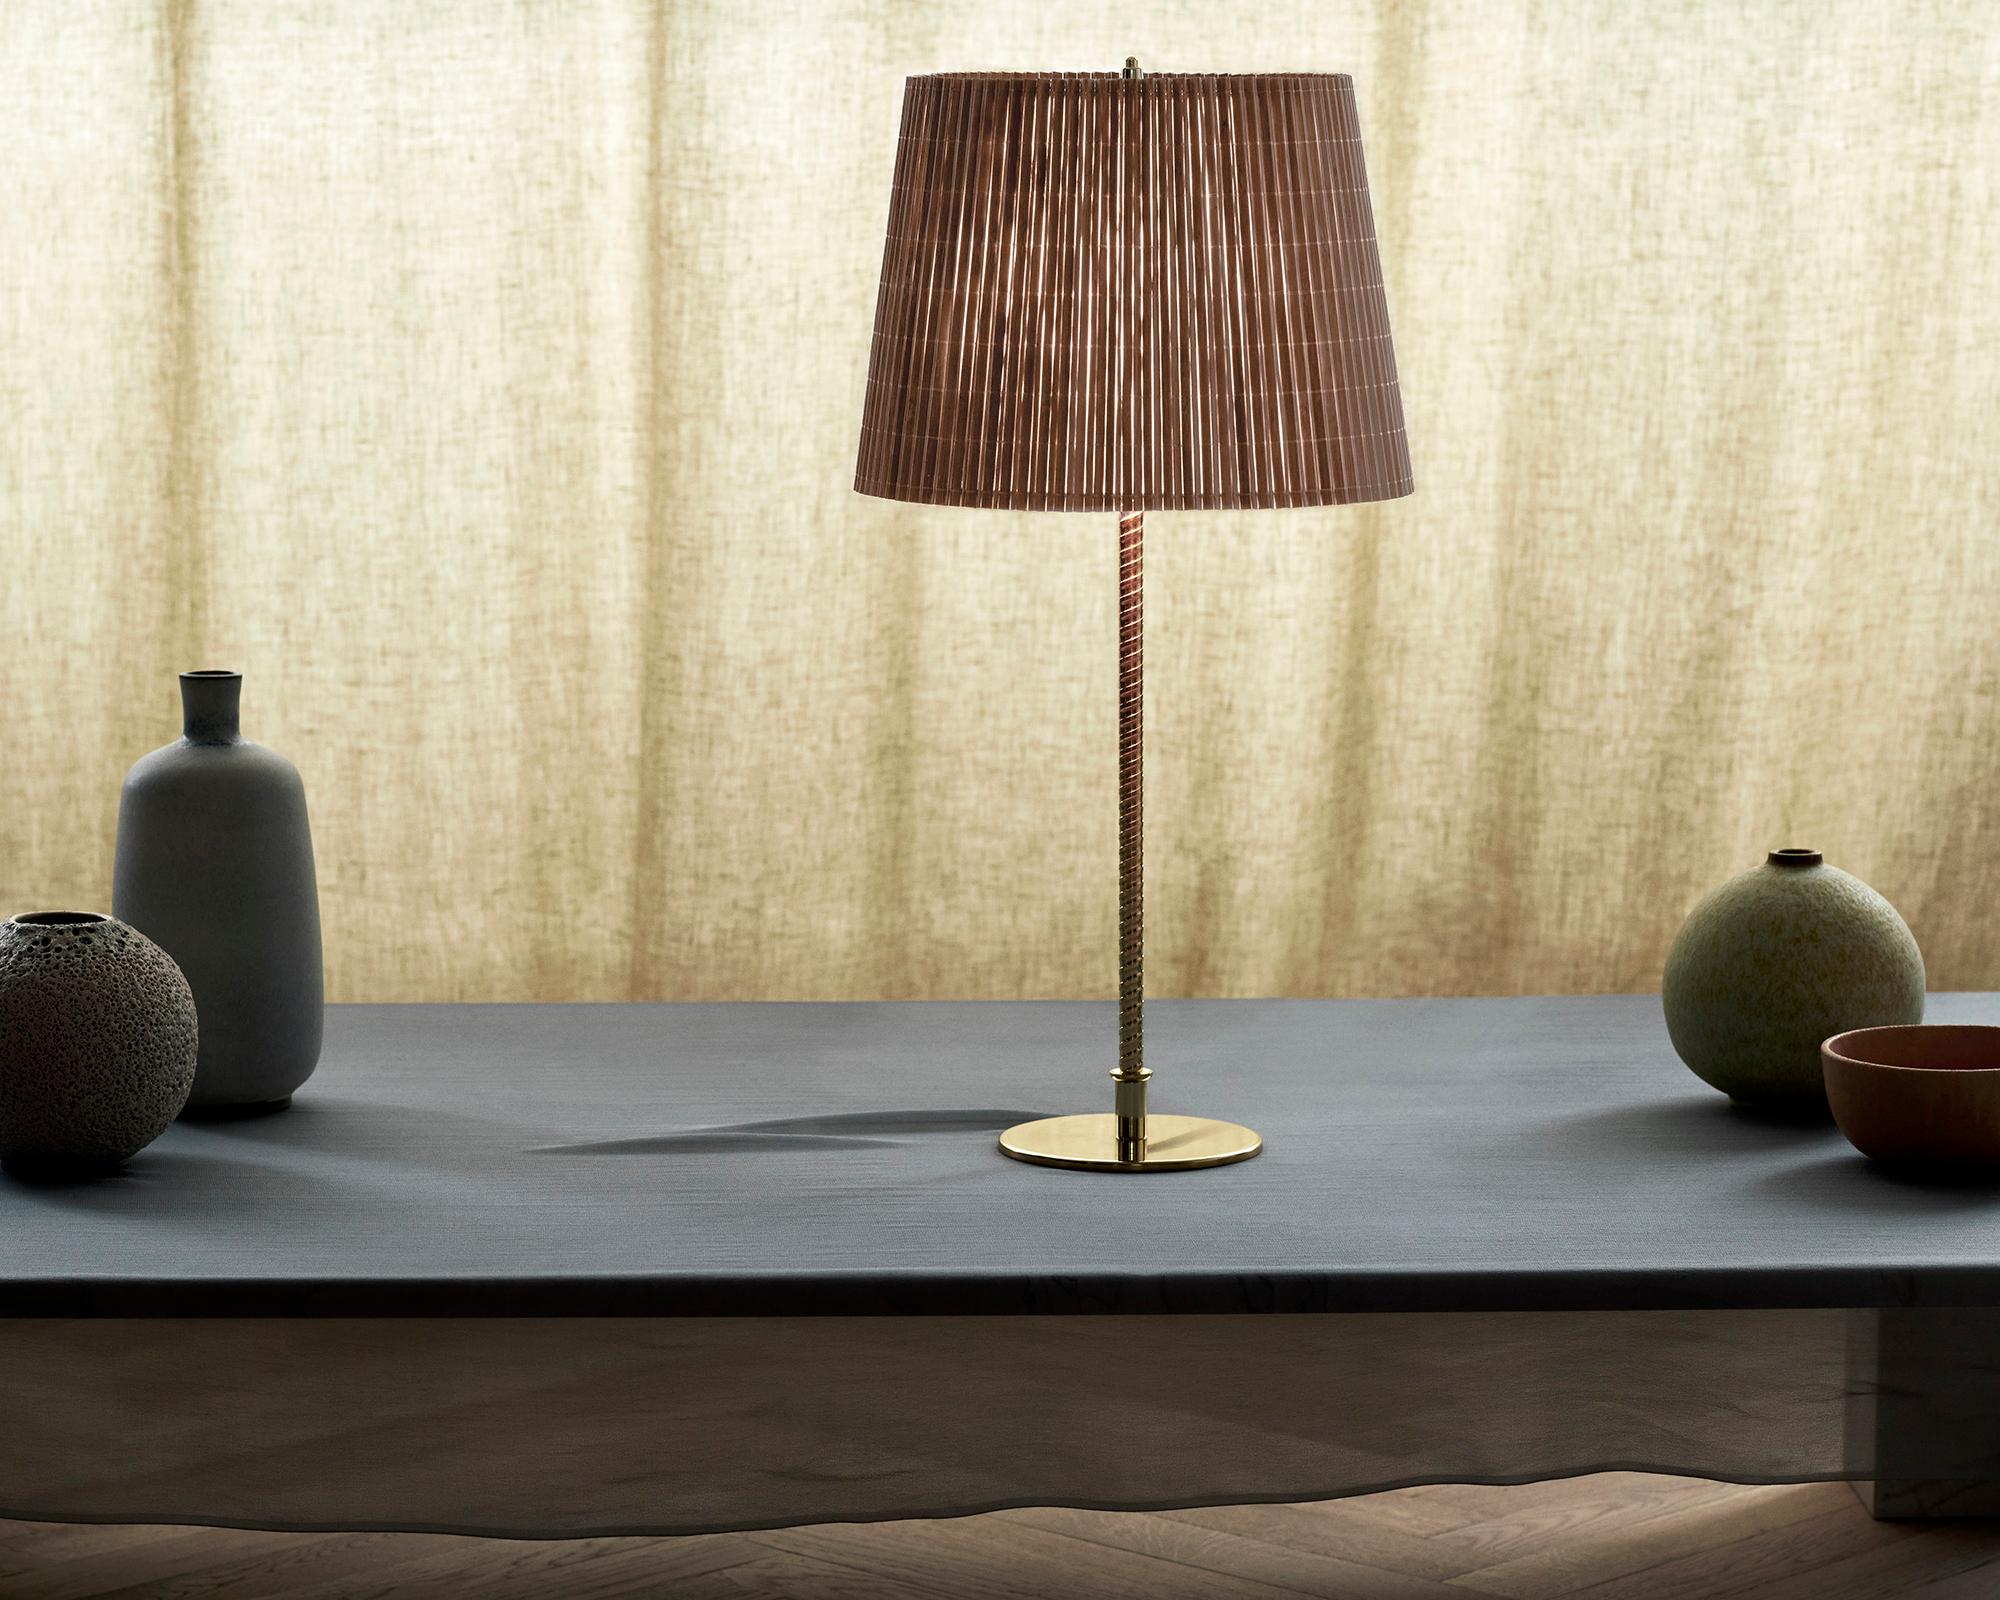 Paavo Tynell Model 9205 Bamboo and Brass Table Lamp for GUBI.

Originally designed by Paavo Tynell around 1950, this authorized GUBI re-edition is executed in brass with a hand-sewn bamboo or handmade canvas shade. The brass stem is milled with a